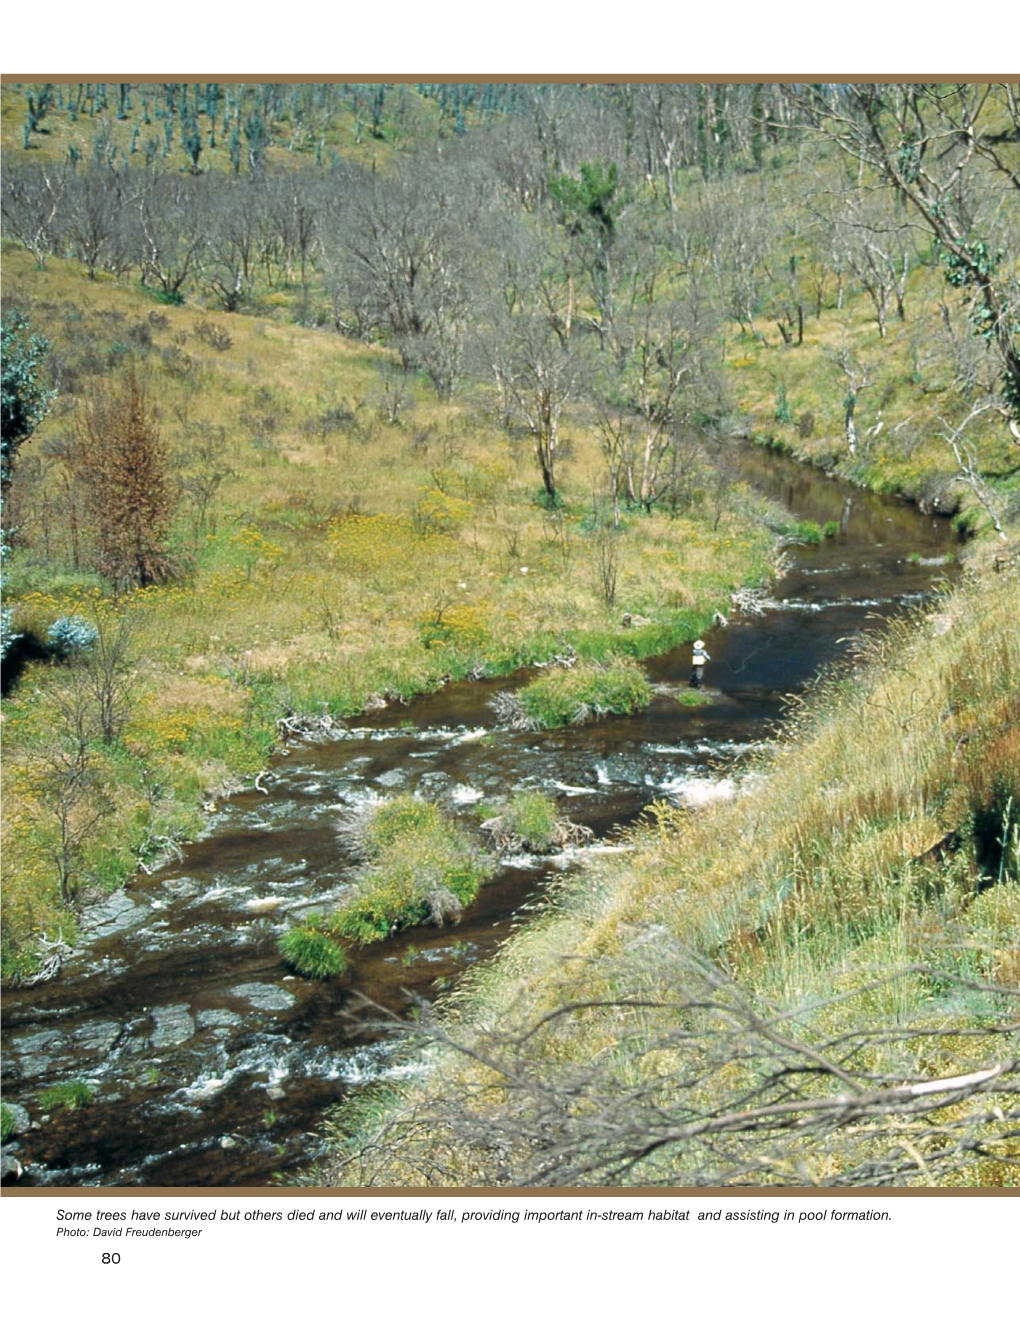 Angling After the 2003 Fires